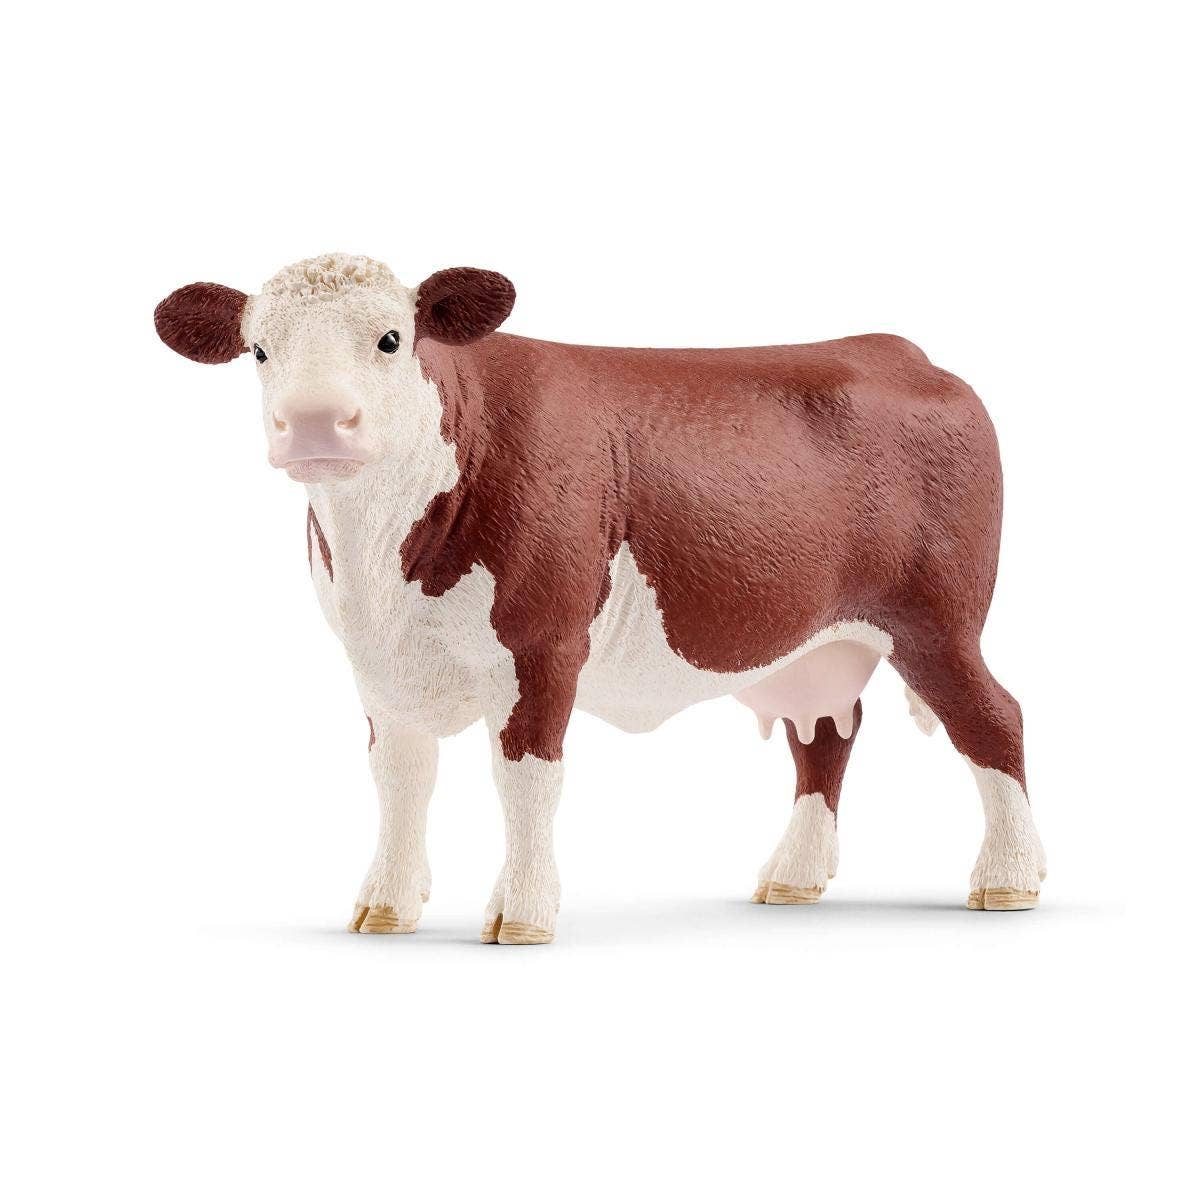 Hereford Cow  Cow Farm Toy